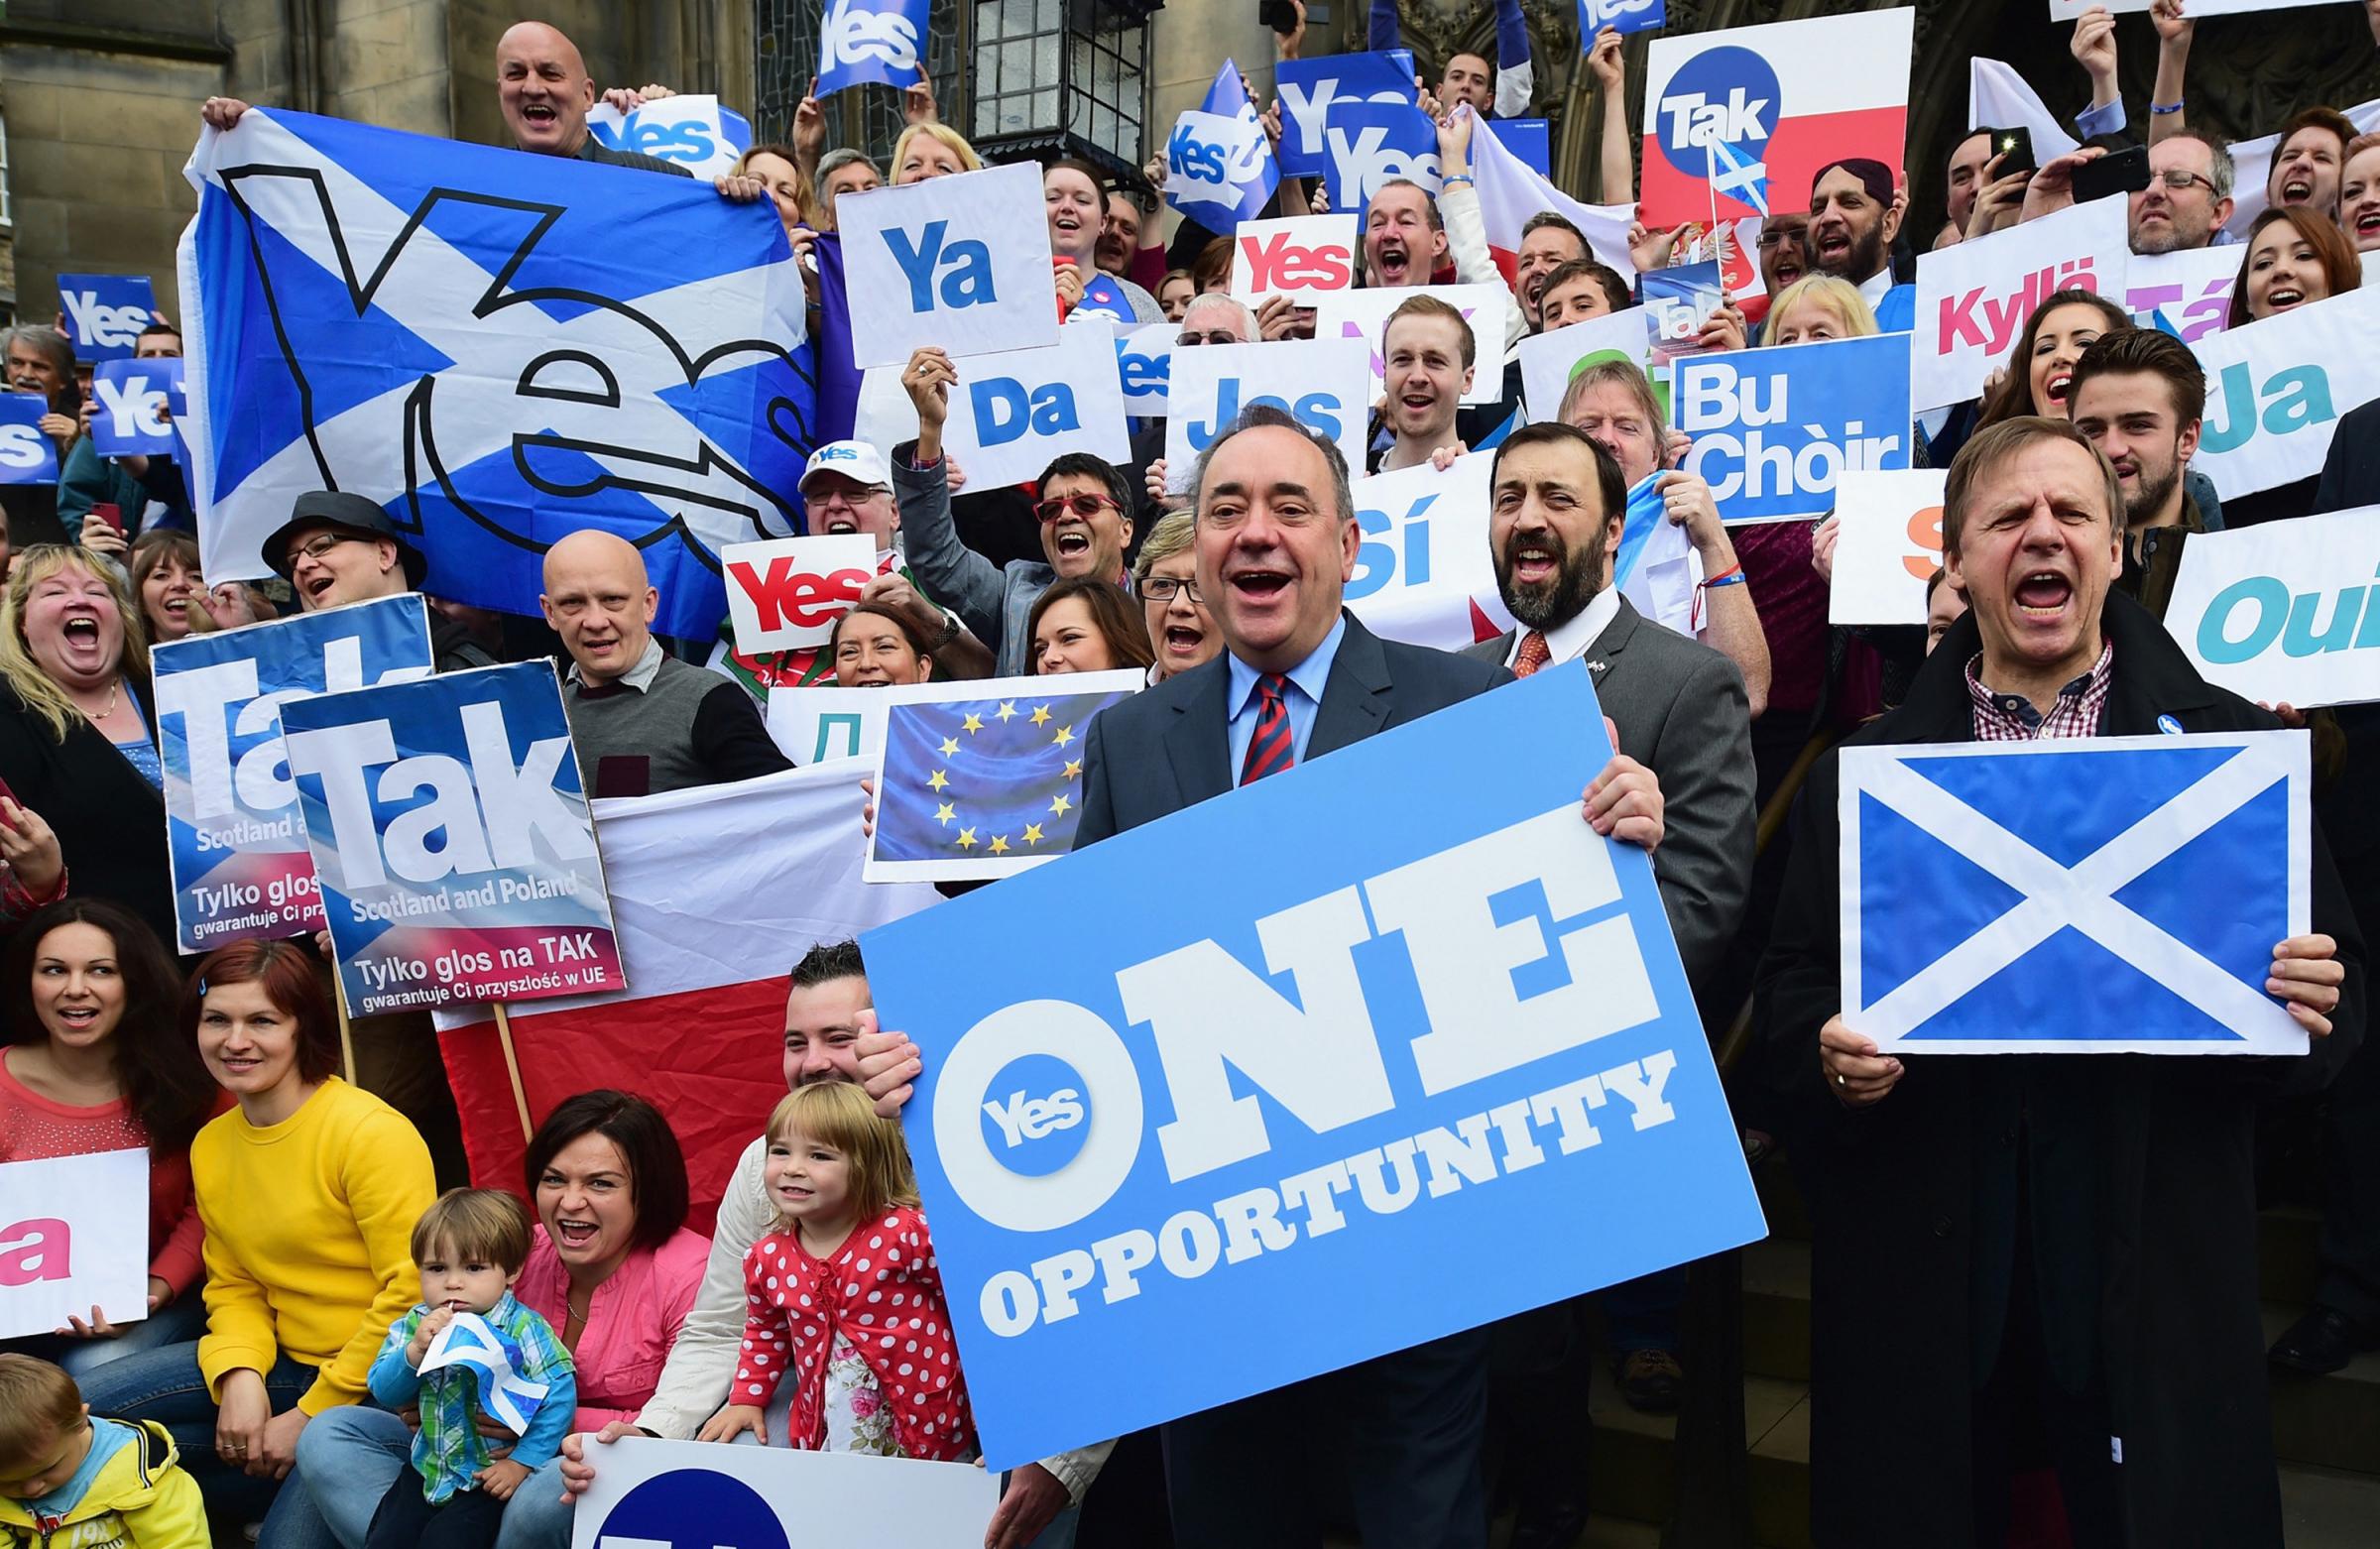 EDINBURGH, SCOTLAND - SEPTEMBER 09: (EDITORS NOTE: This image is a re-crop of image #455028102) First Minister Alex Salmond, meets with Scots and other European citizens to celebrate European citizenship and Scotlands continued EU membership with a